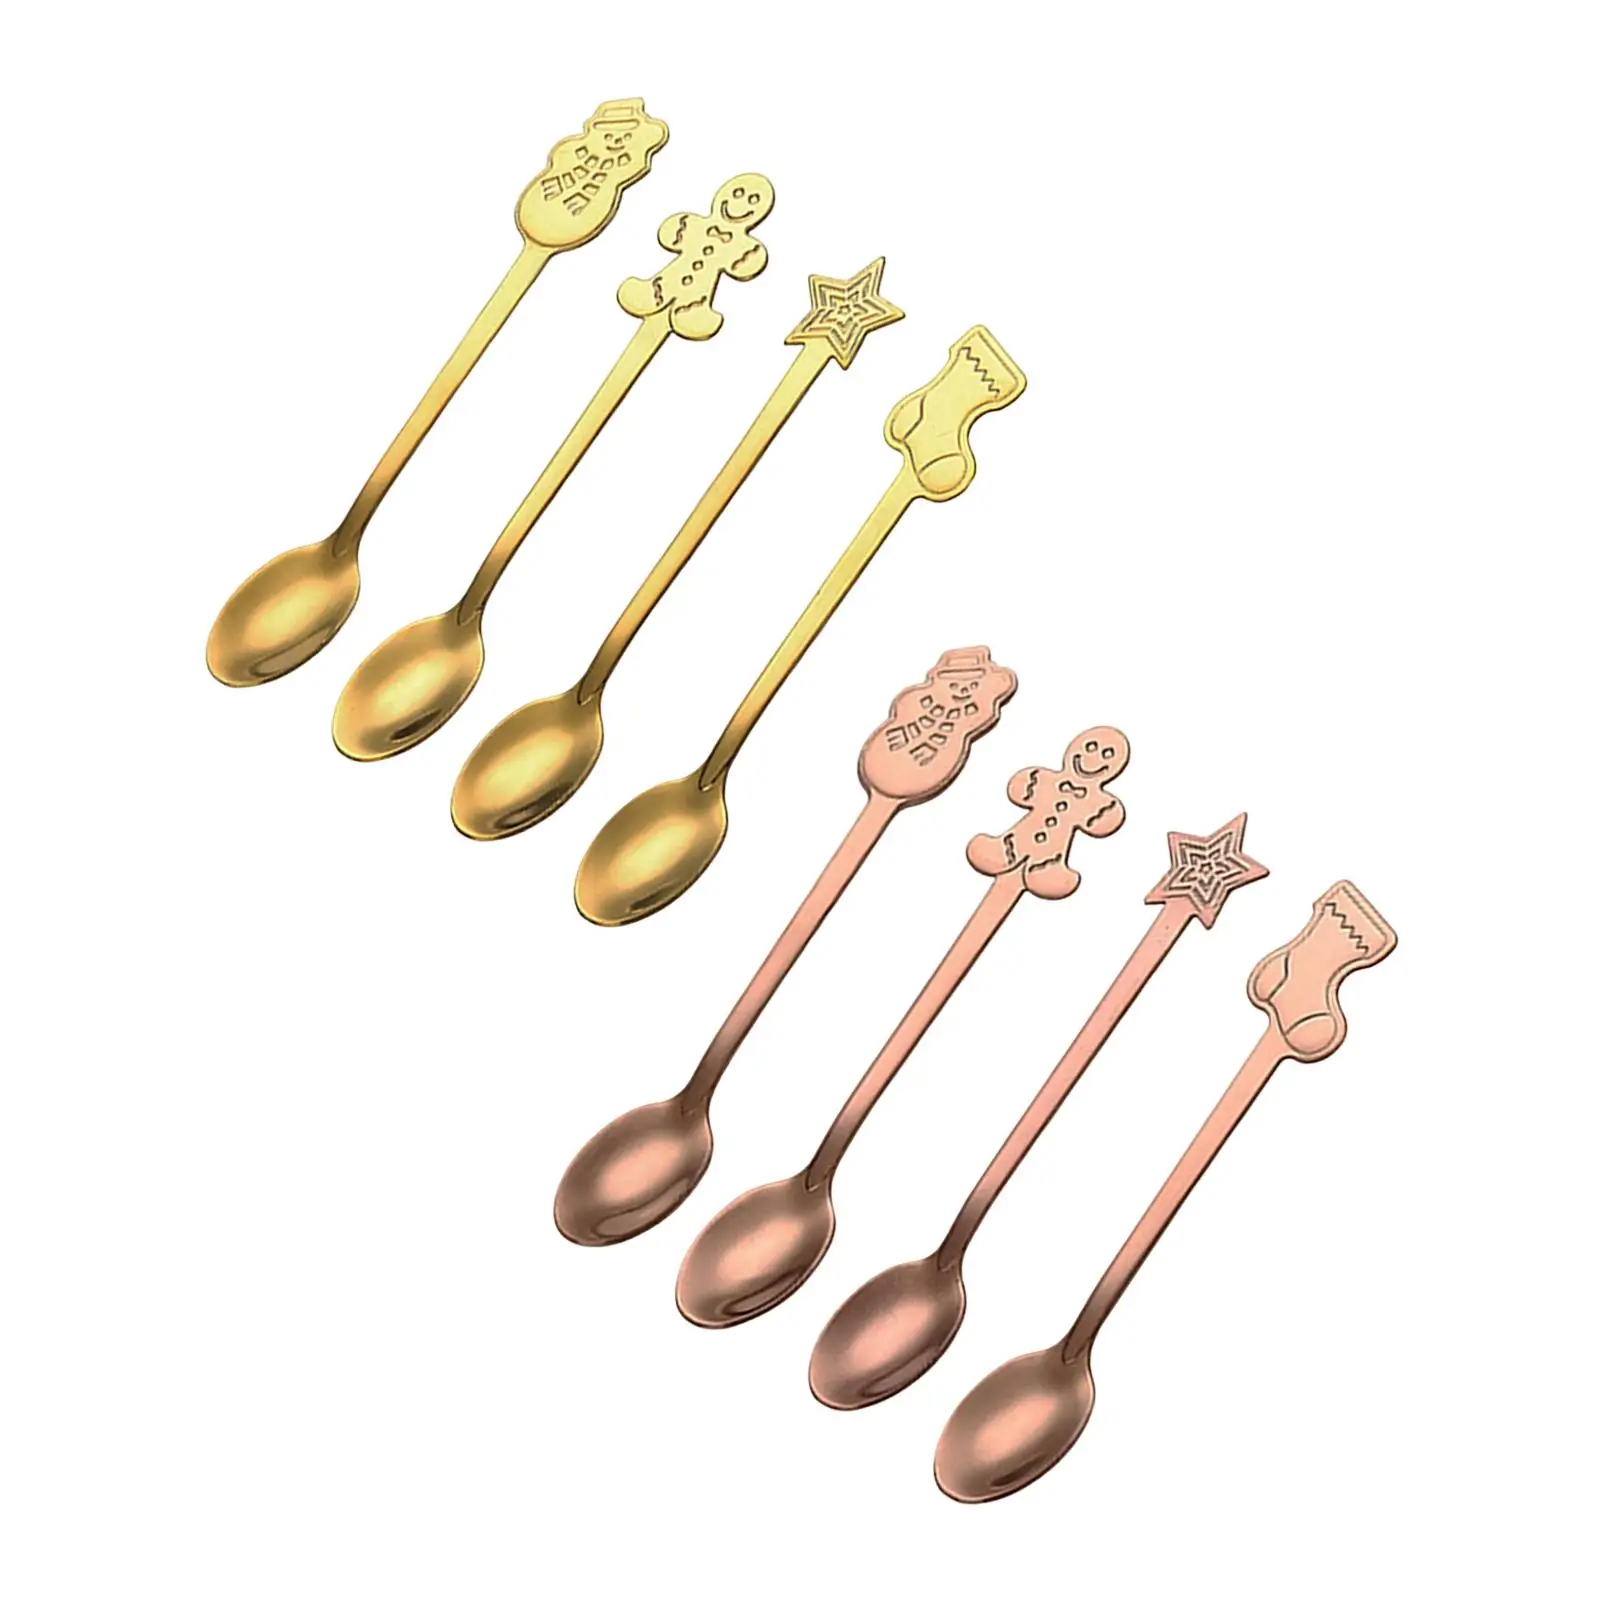 4 Pieces Christmas Coffee Spoons Espresso Spoons Kitchen Cutlery Small Spoons Kitchen for Hotel Wedding Cafe Cake Sugar